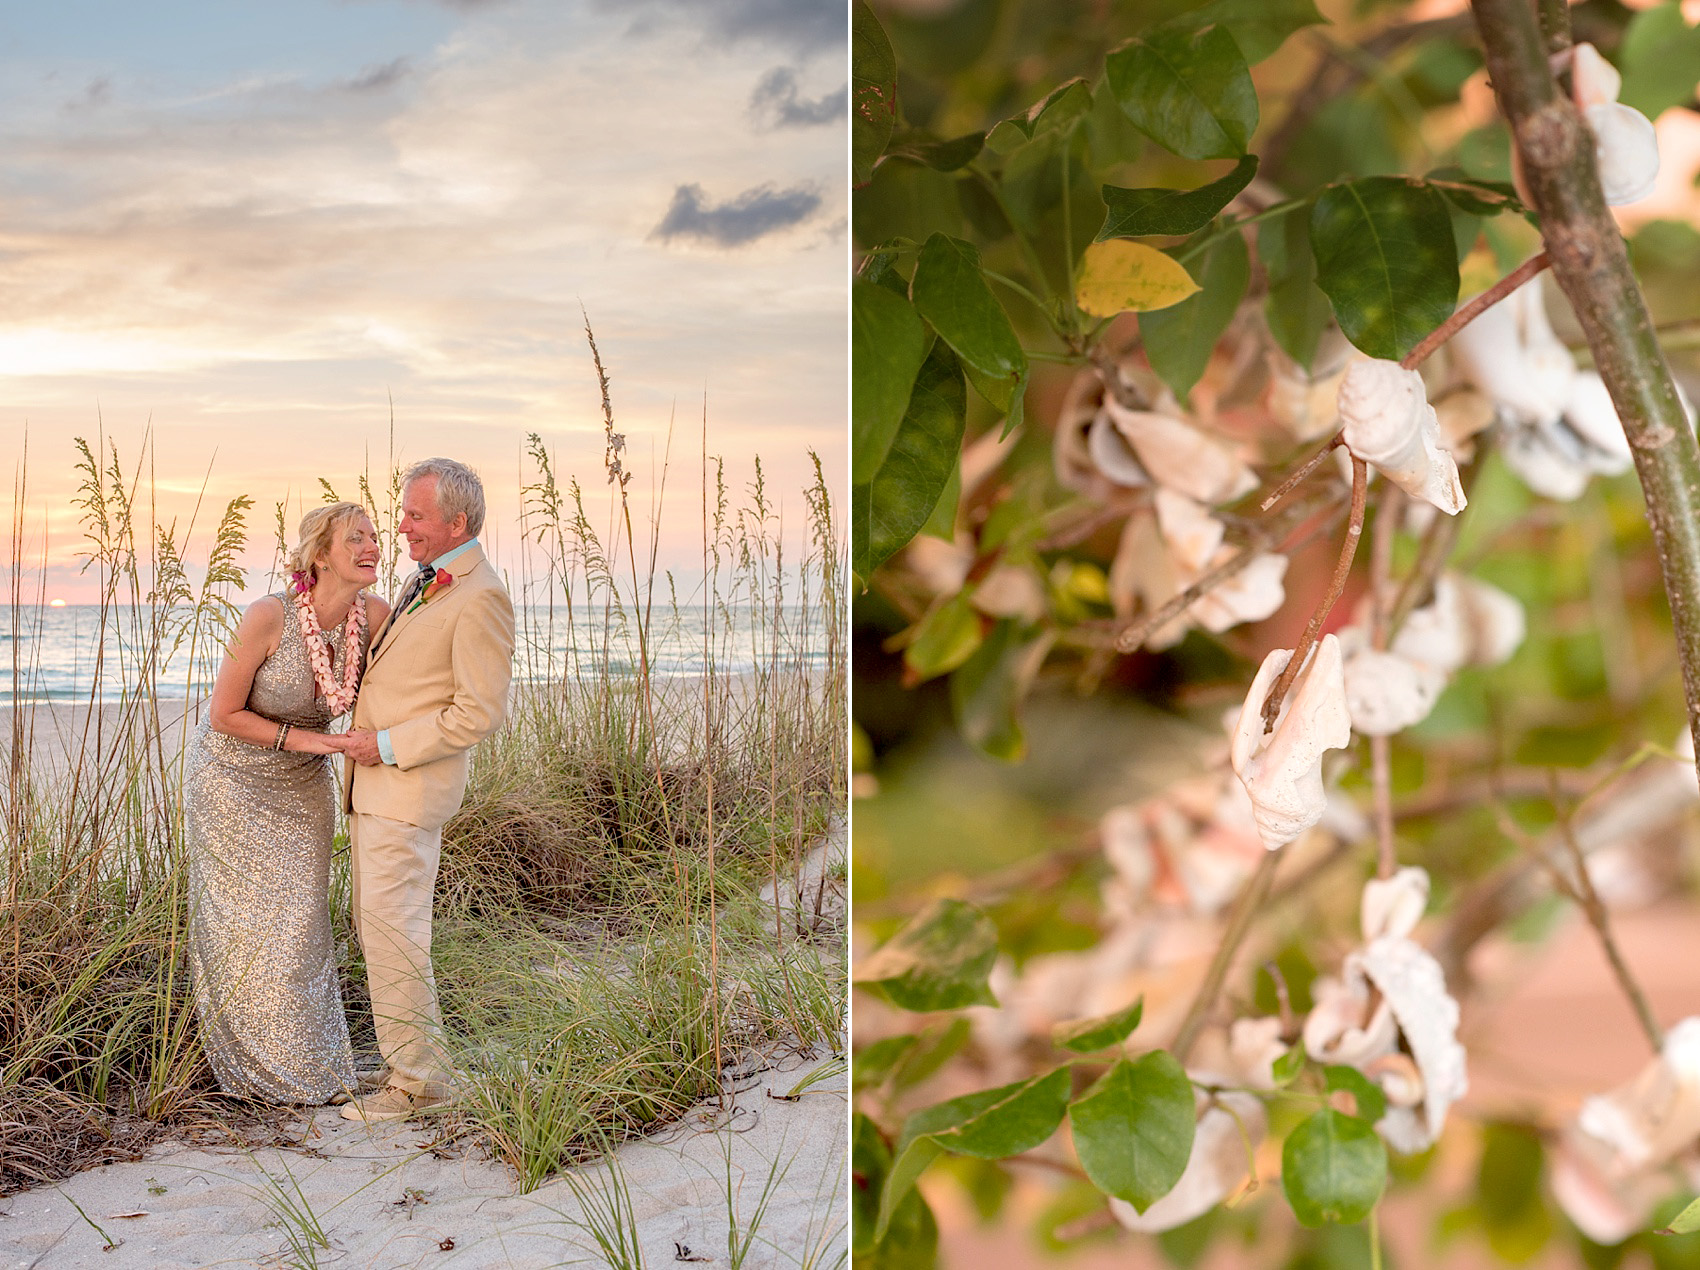 Captiva Island small wedding sunset beach photos of the bride and groom. Photos by Mikkel Paige Photography.